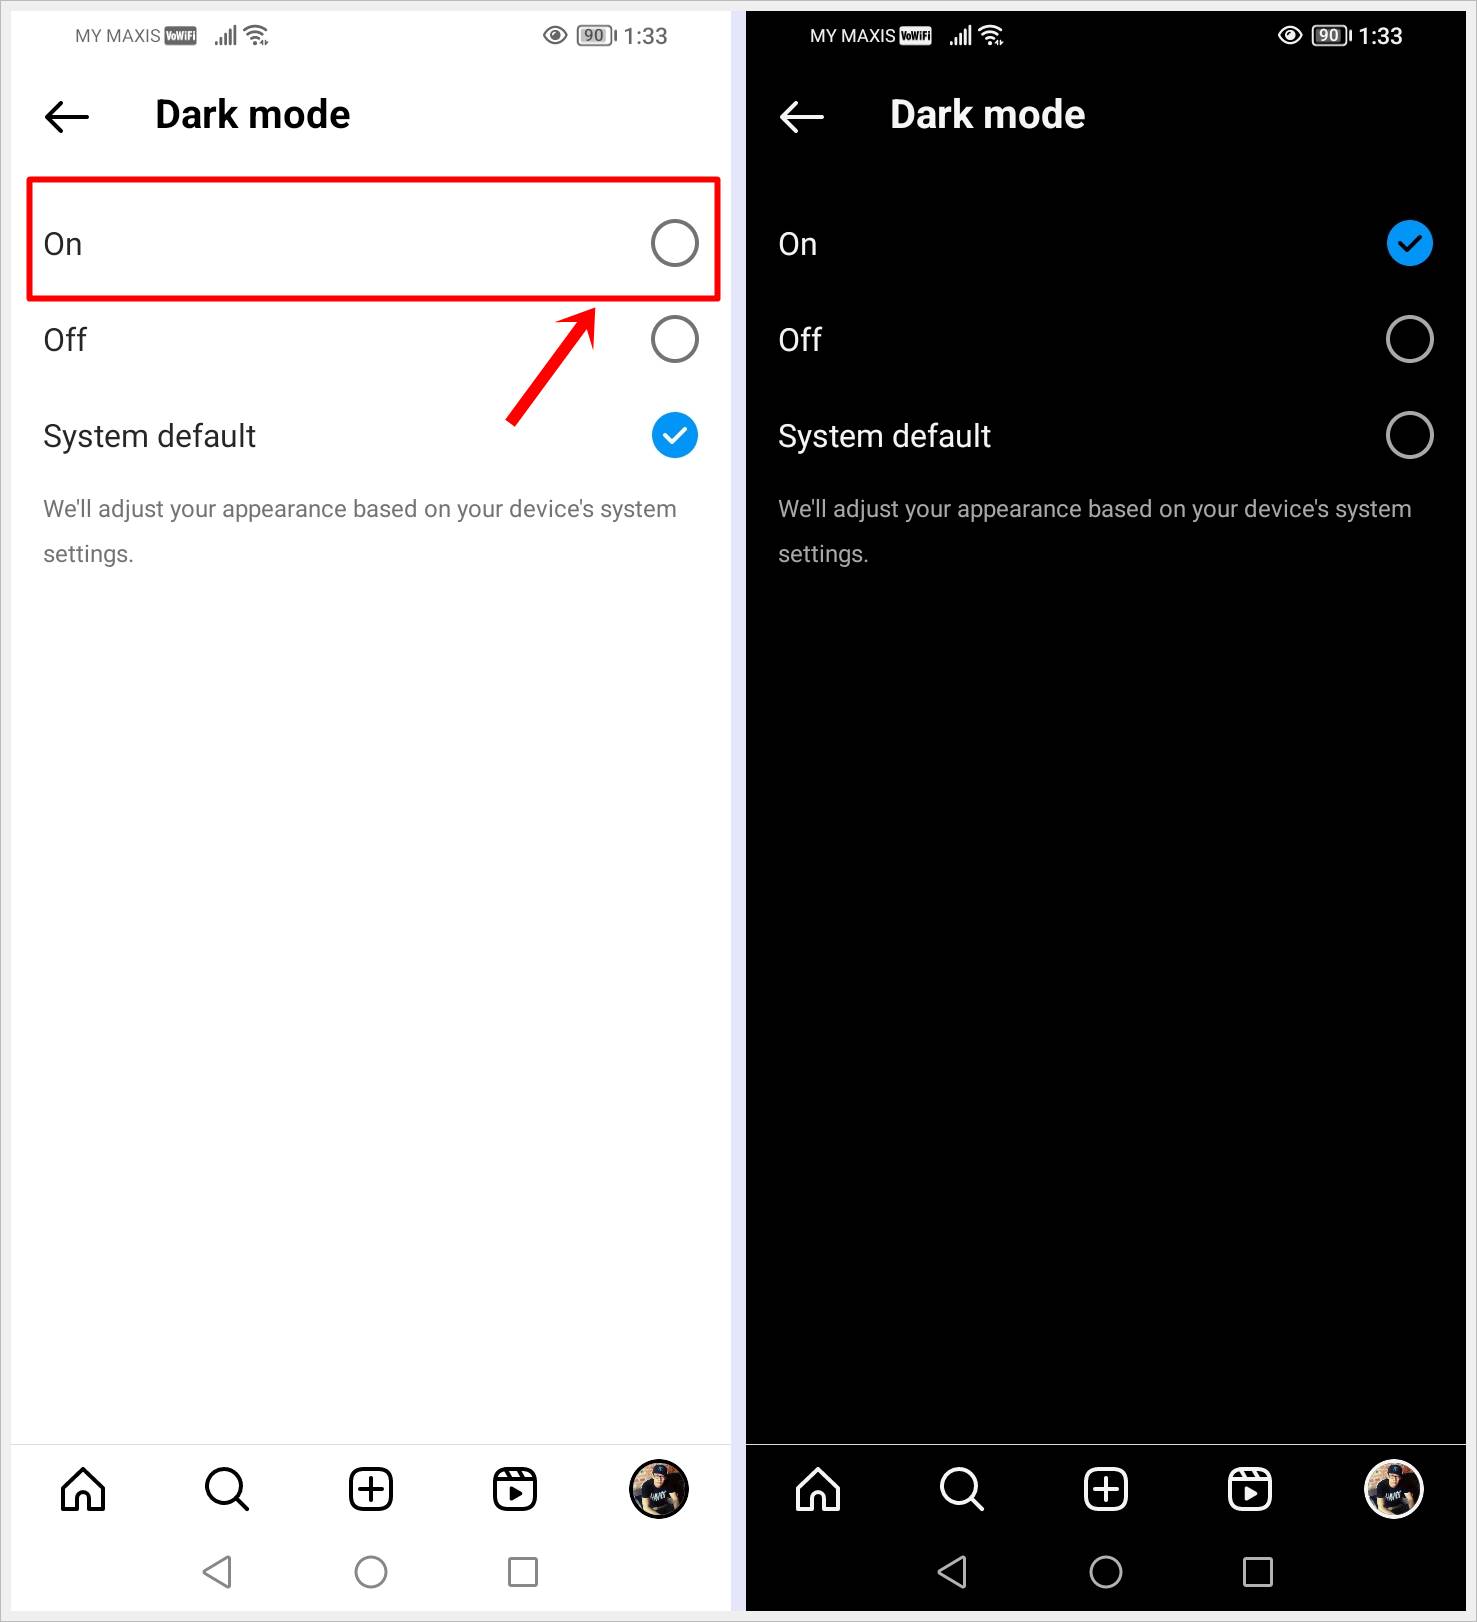 This image displays two screenshots, showcasing the transition of the Instagram Android app from light mode to dark mode.